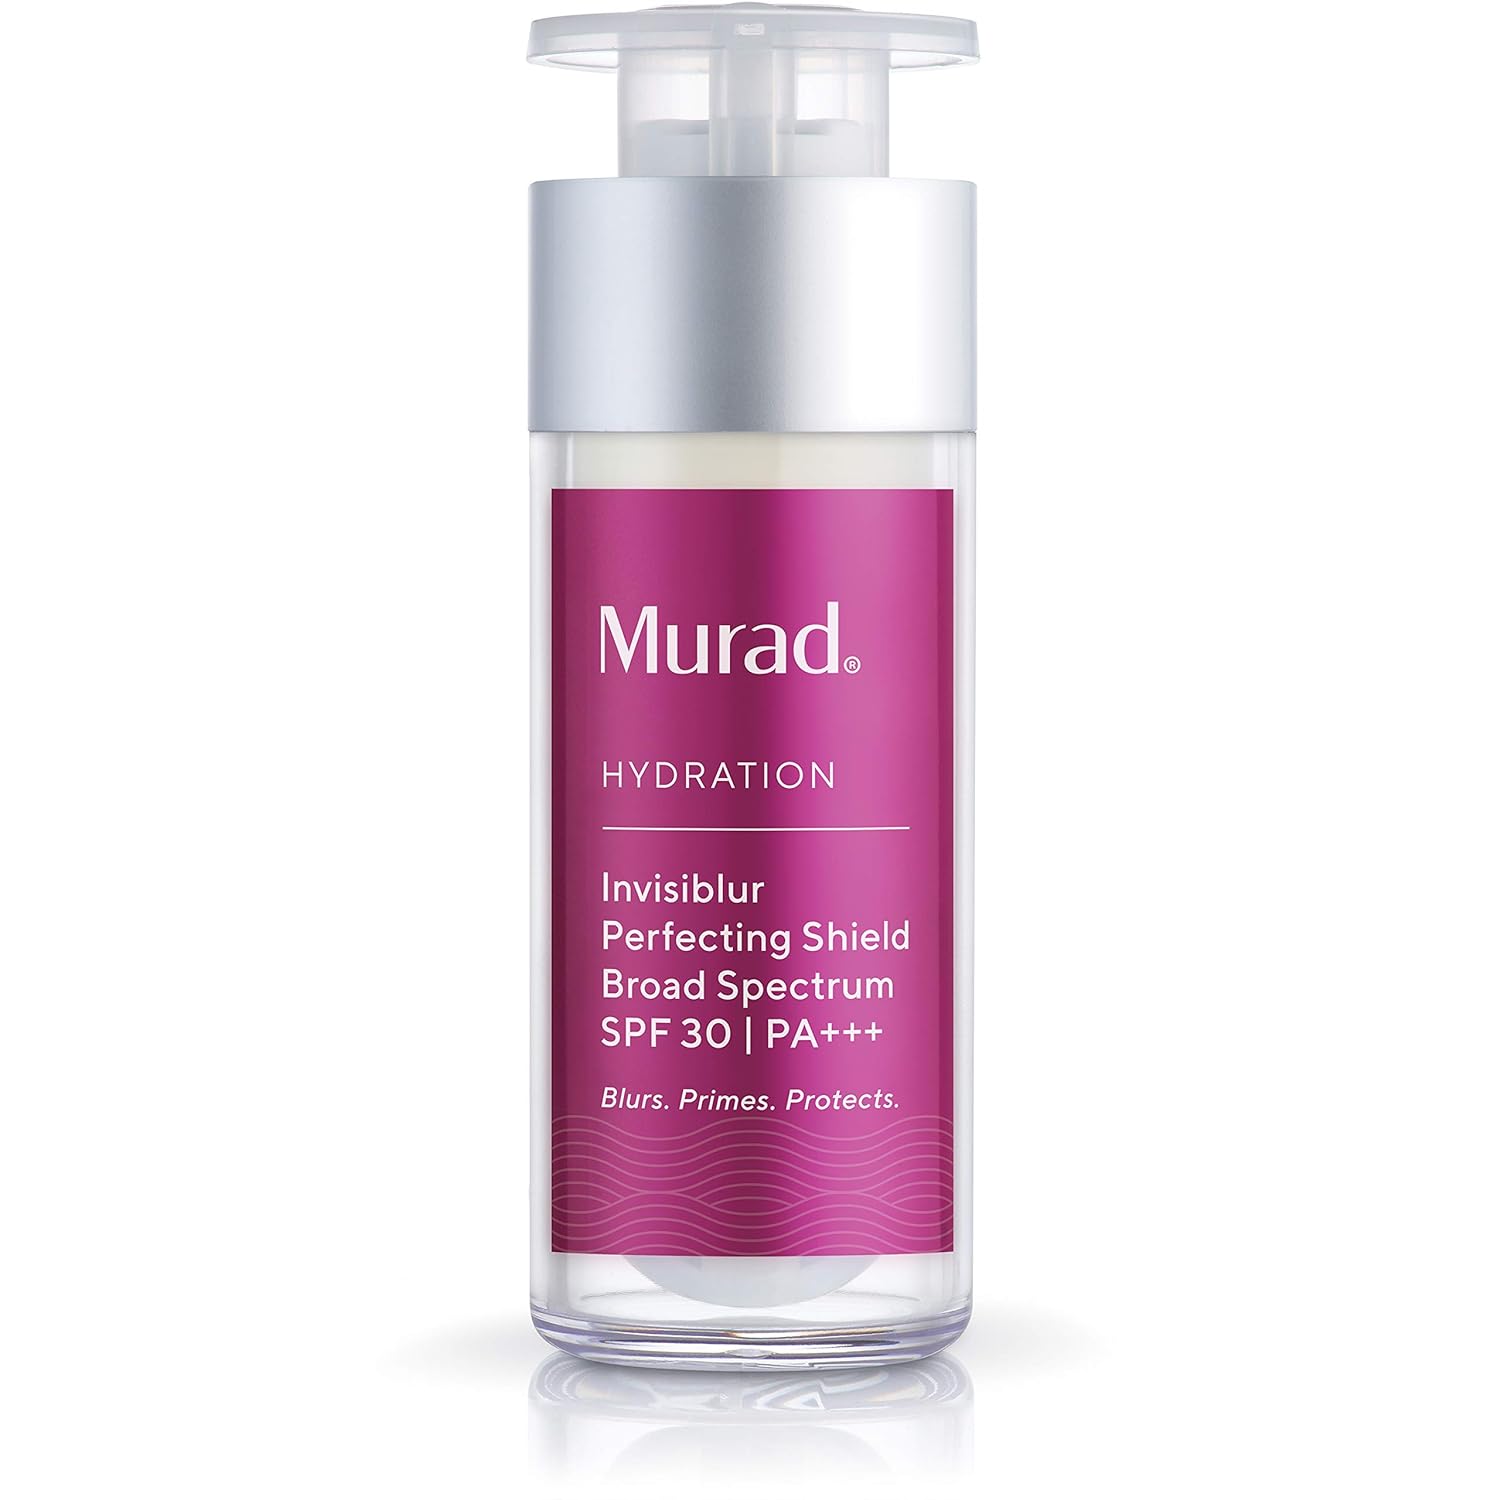  Murad Hydration Invisiblur Perfecting Shield Broad Spectrum SPF 30-3-In-1 Skin Primer for Face - Blurs, Primes and Protects - Skin Care Beauty Product for Longer Lasting Makeup